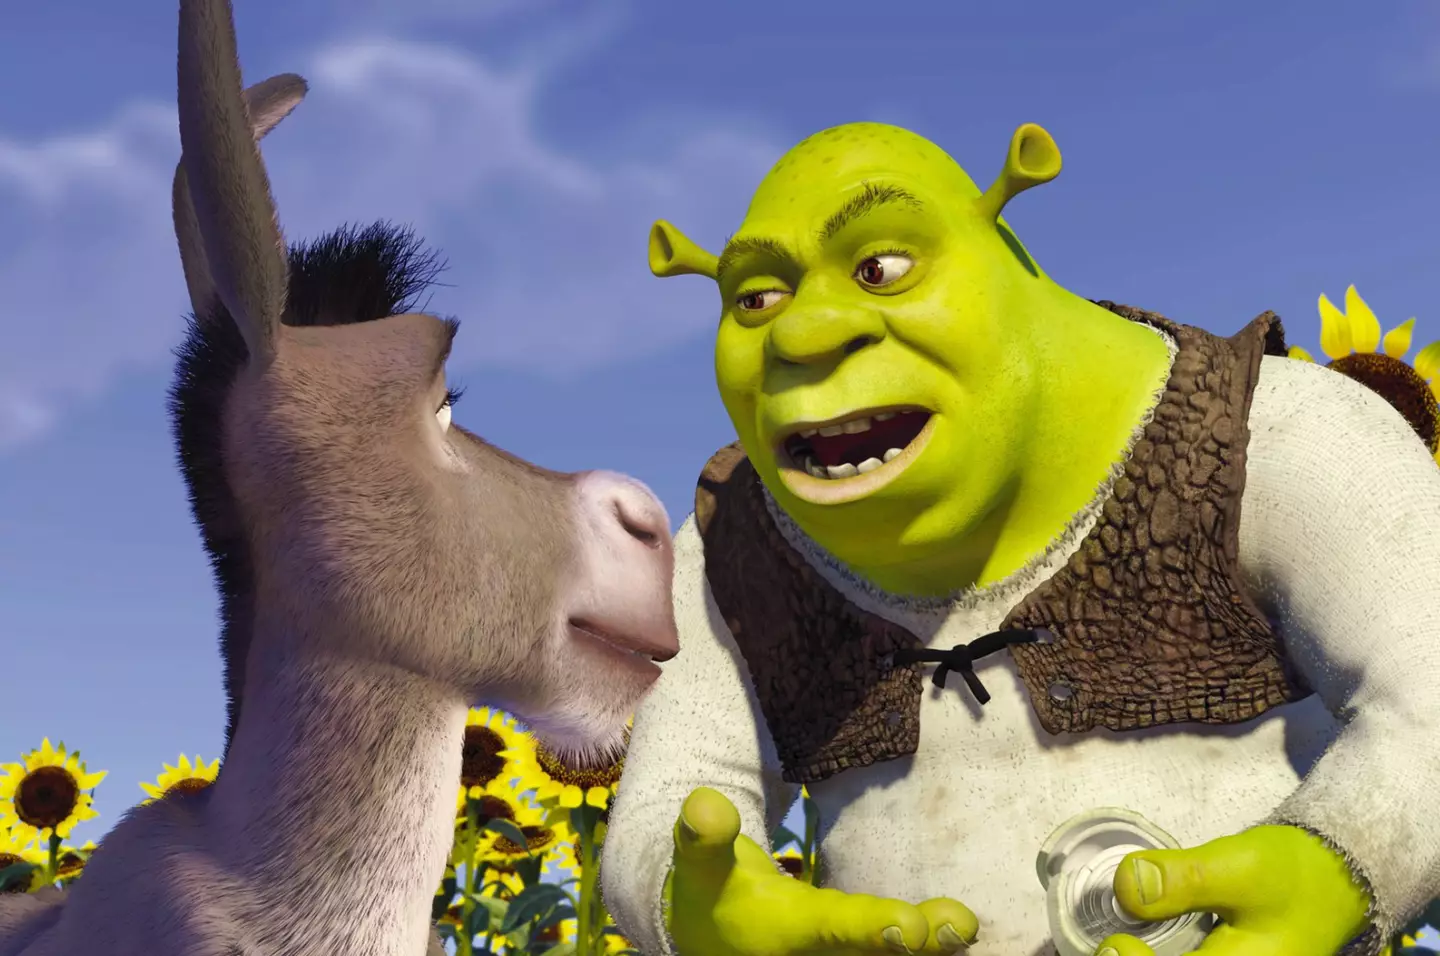 Myers voiced Shrek in the original film and three sequels.